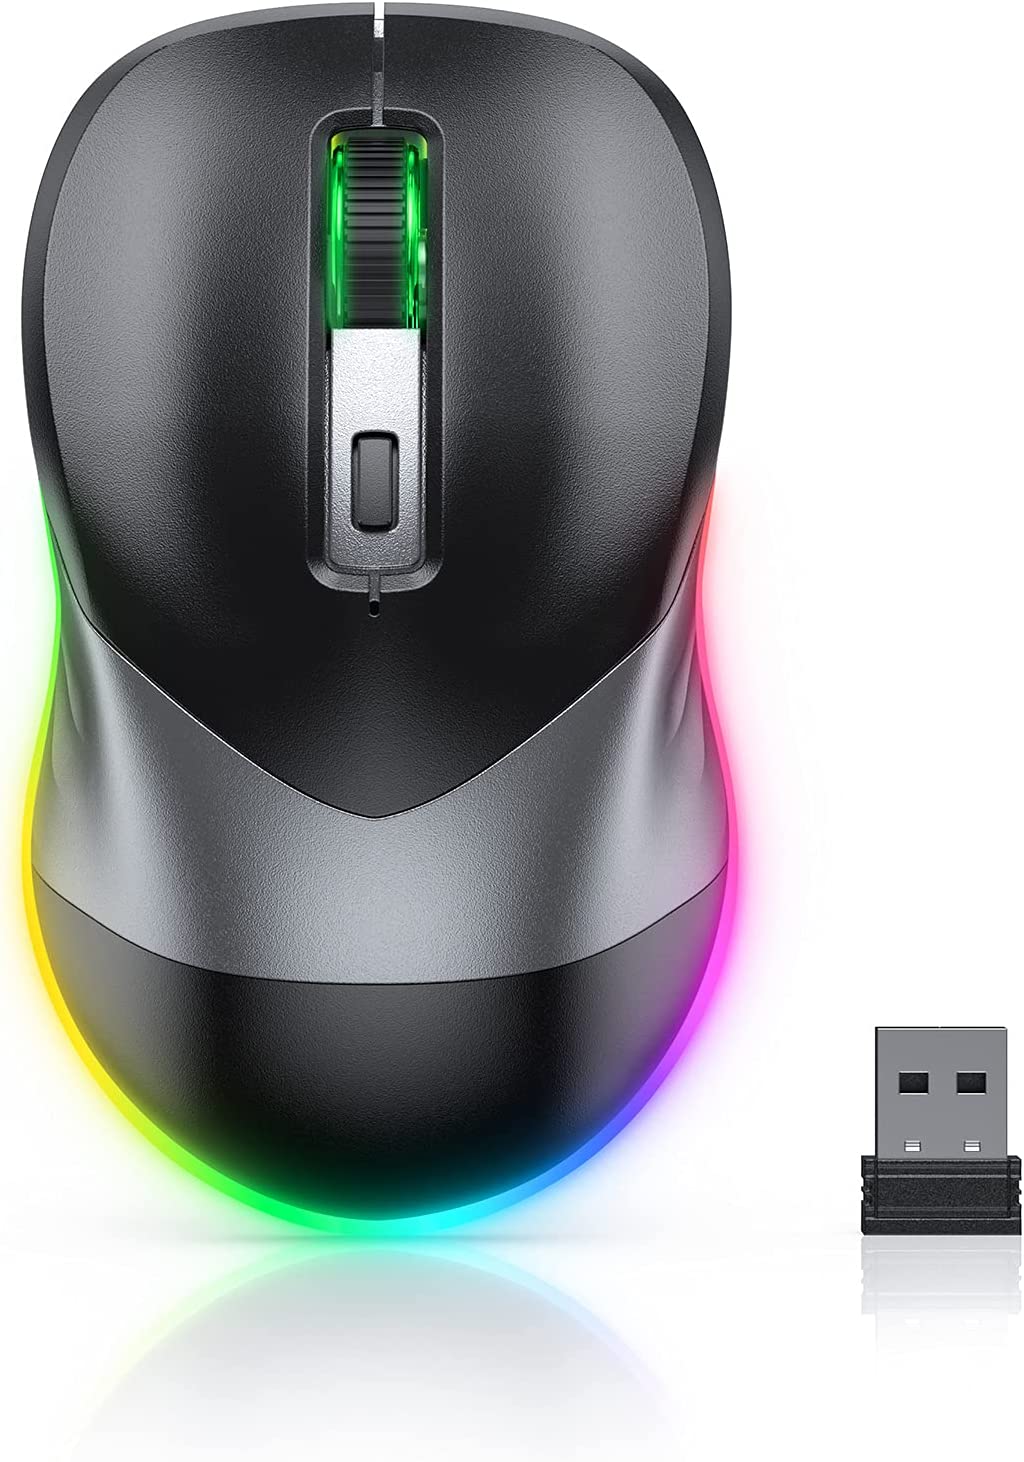 ''Wireless Mouse, Jiggler Mouse for Laptop - LED Mouse Rechargeable COMPUTER Mice Mouse Mover Undetec